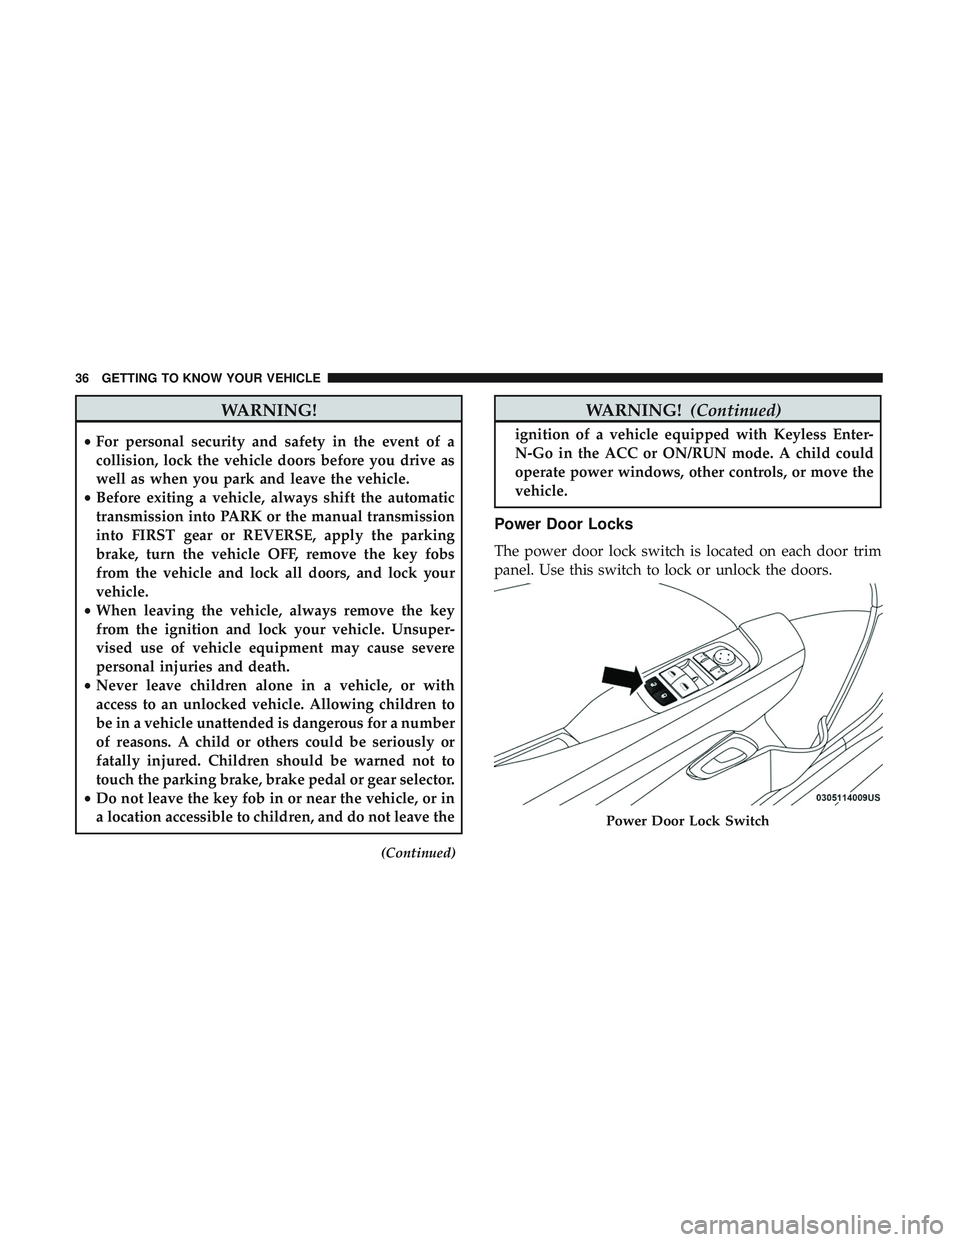 DODGE CHALLENGER 2019 Owners Guide WARNING!
•For personal security and safety in the event of a
collision, lock the vehicle doors before you drive as
well as when you park and leave the vehicle.
• Before exiting a vehicle, always s